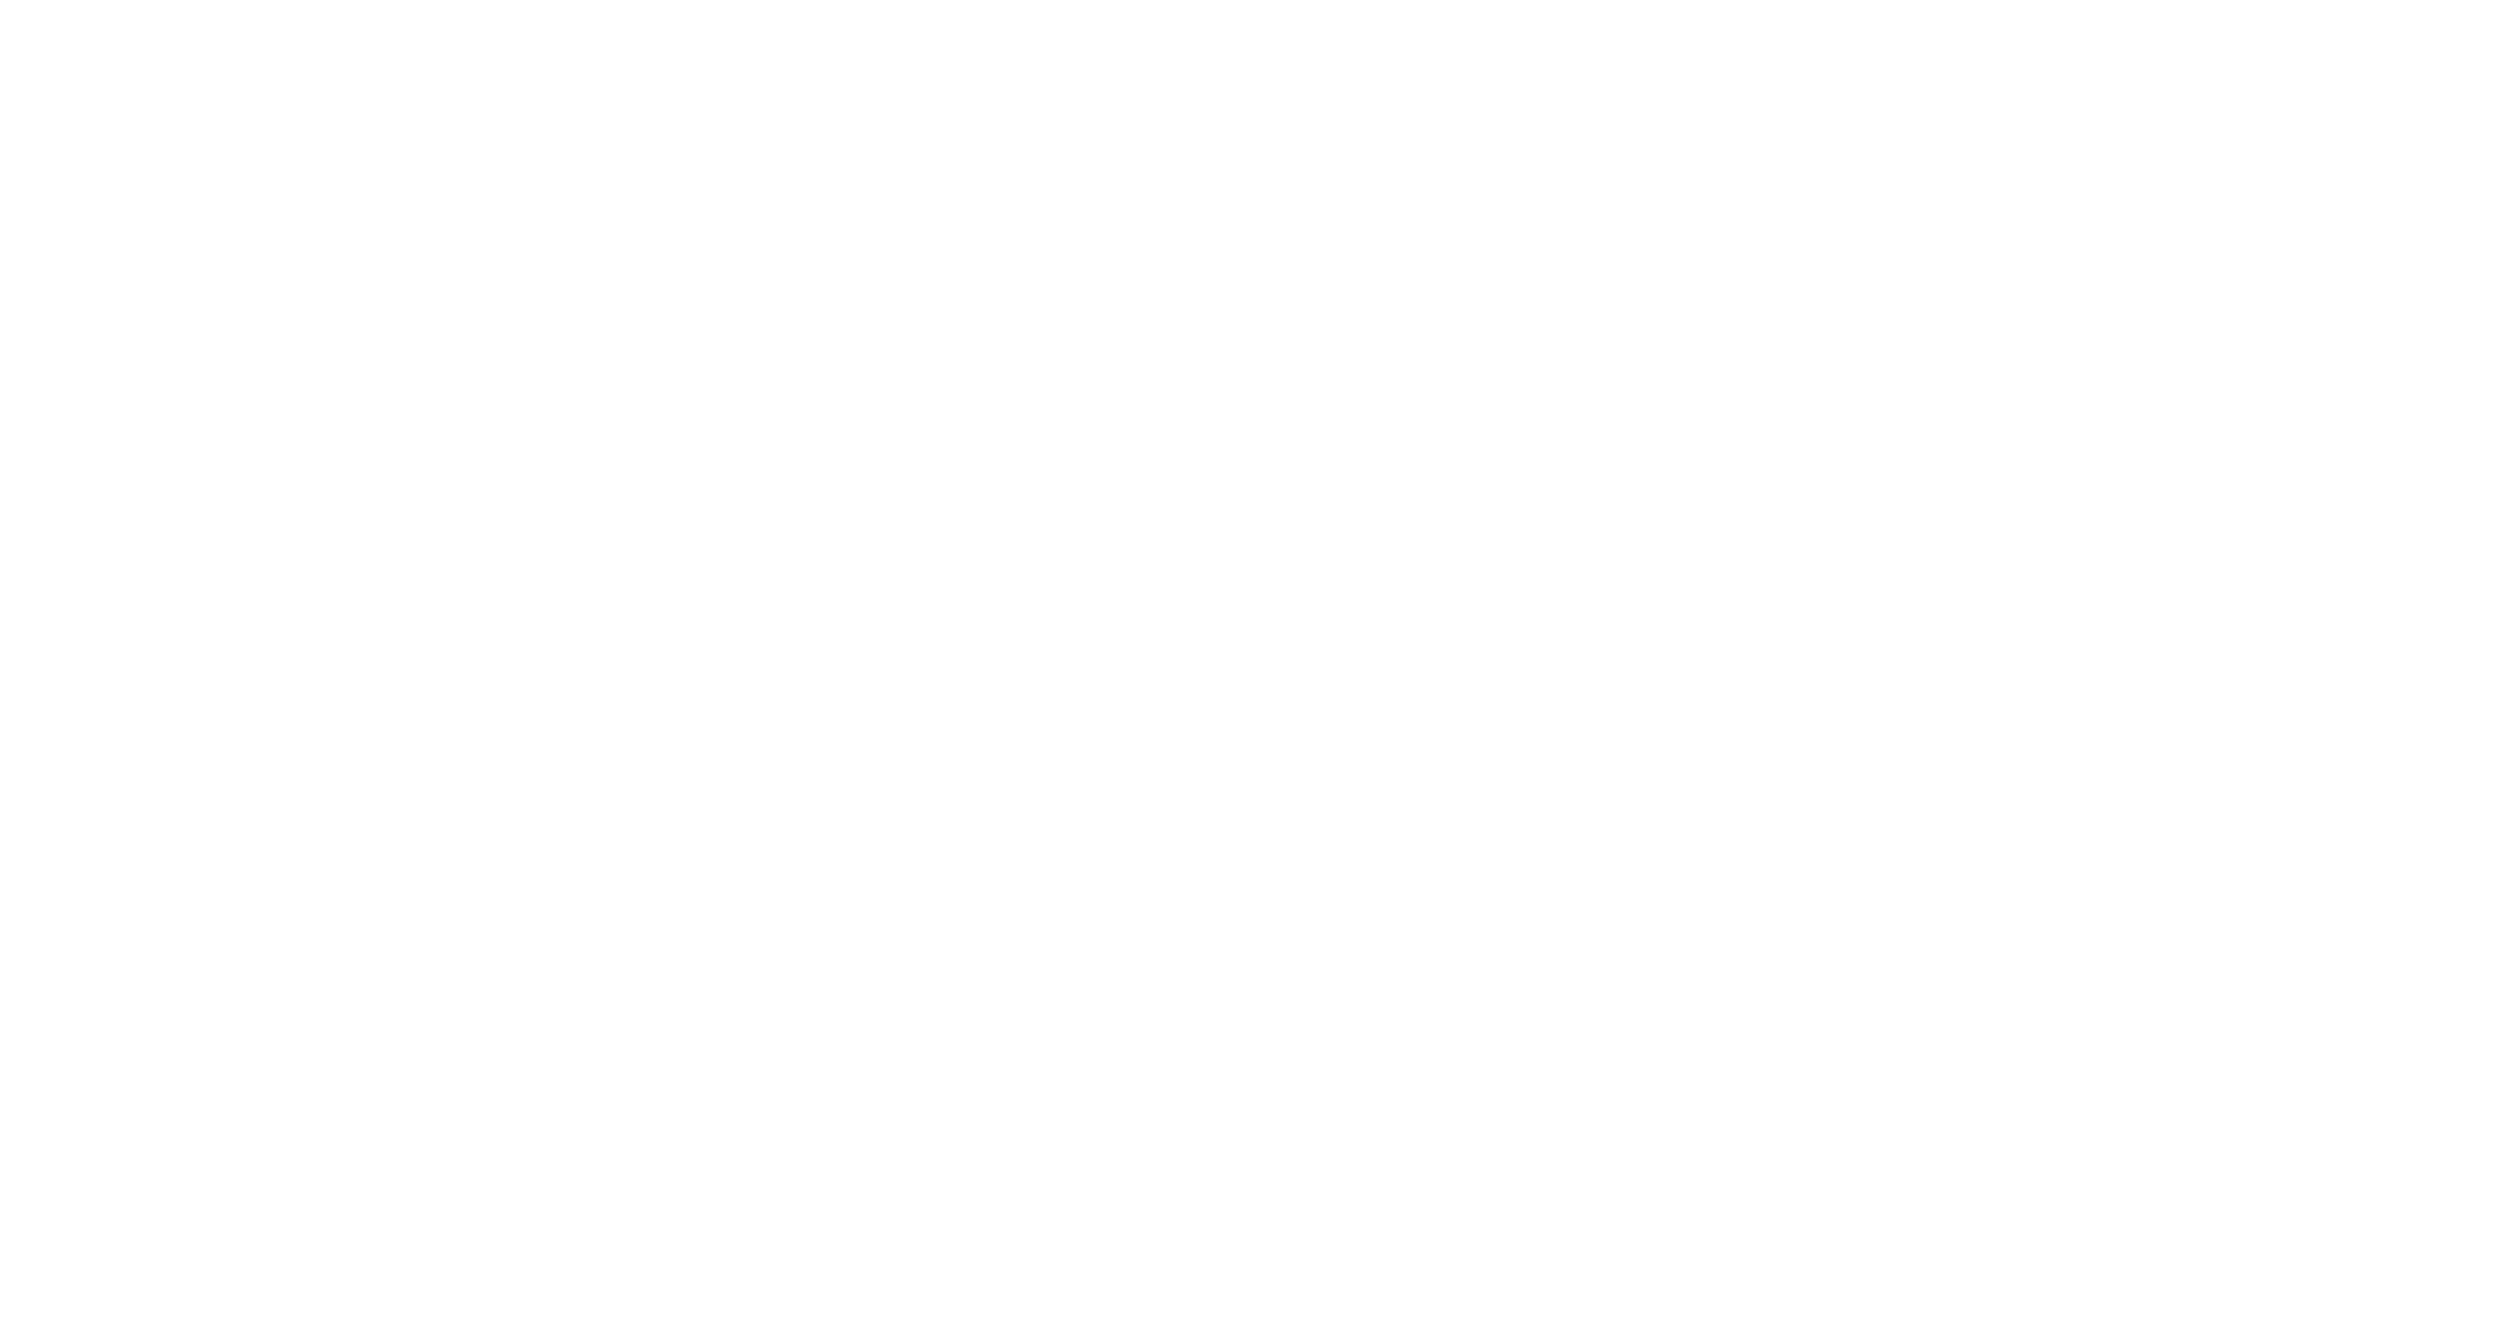 The Boys &amp; Girls Clubs of Fresno County